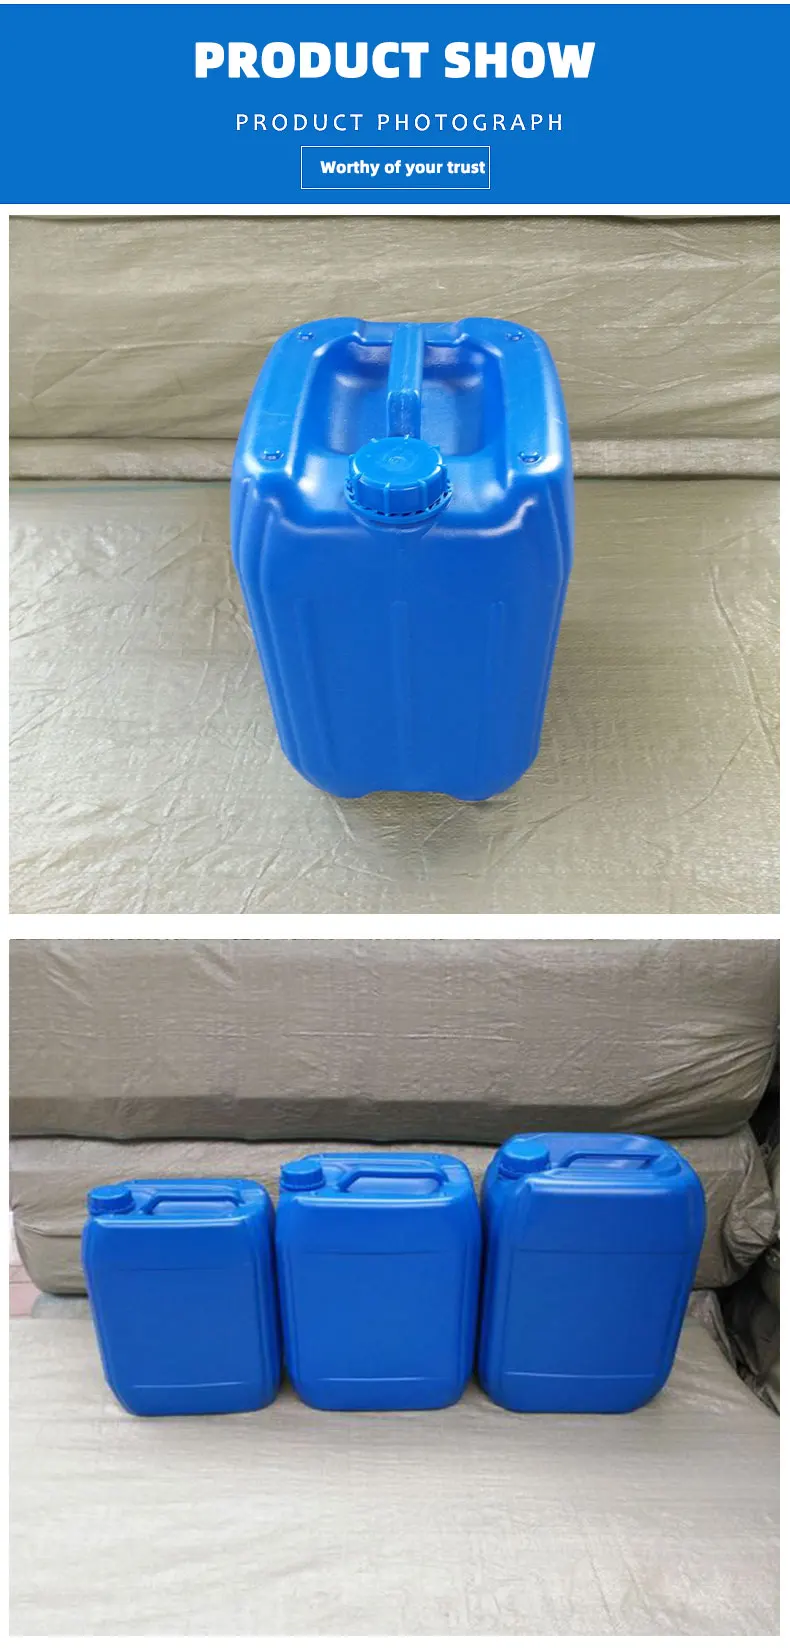 Buy Standard Quality China Wholesale 10 Litre Plastic Buckets With Lids  Making Machine Food Grade 3 Gallon Plastic Buckets With Lids $10000 Direct  from Factory at Ningbo Haijiang Machinery Manufacturing Co., Ltd.